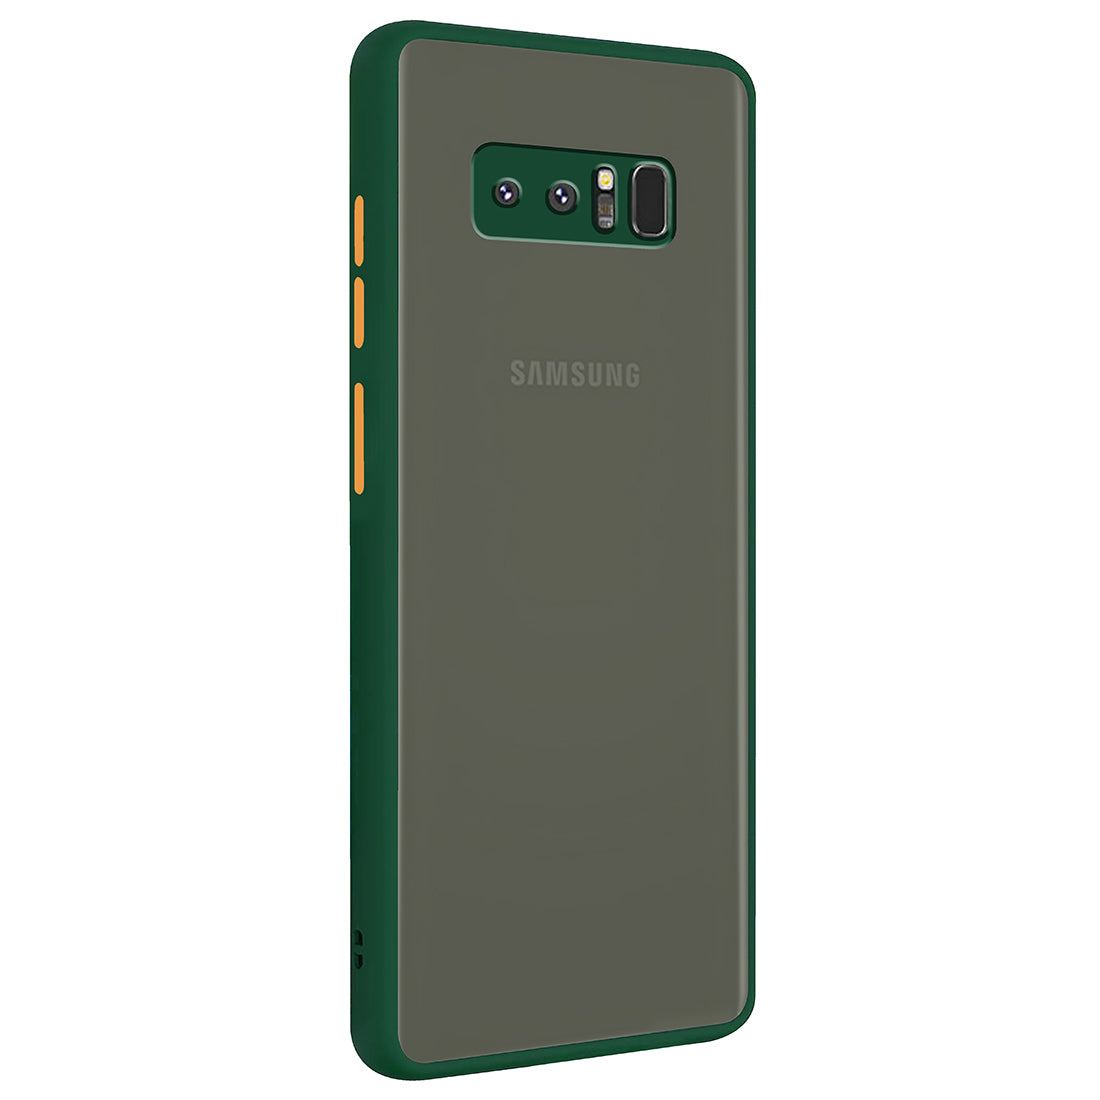 Smoke Back Case Cover for Samsung Galaxy Note 8